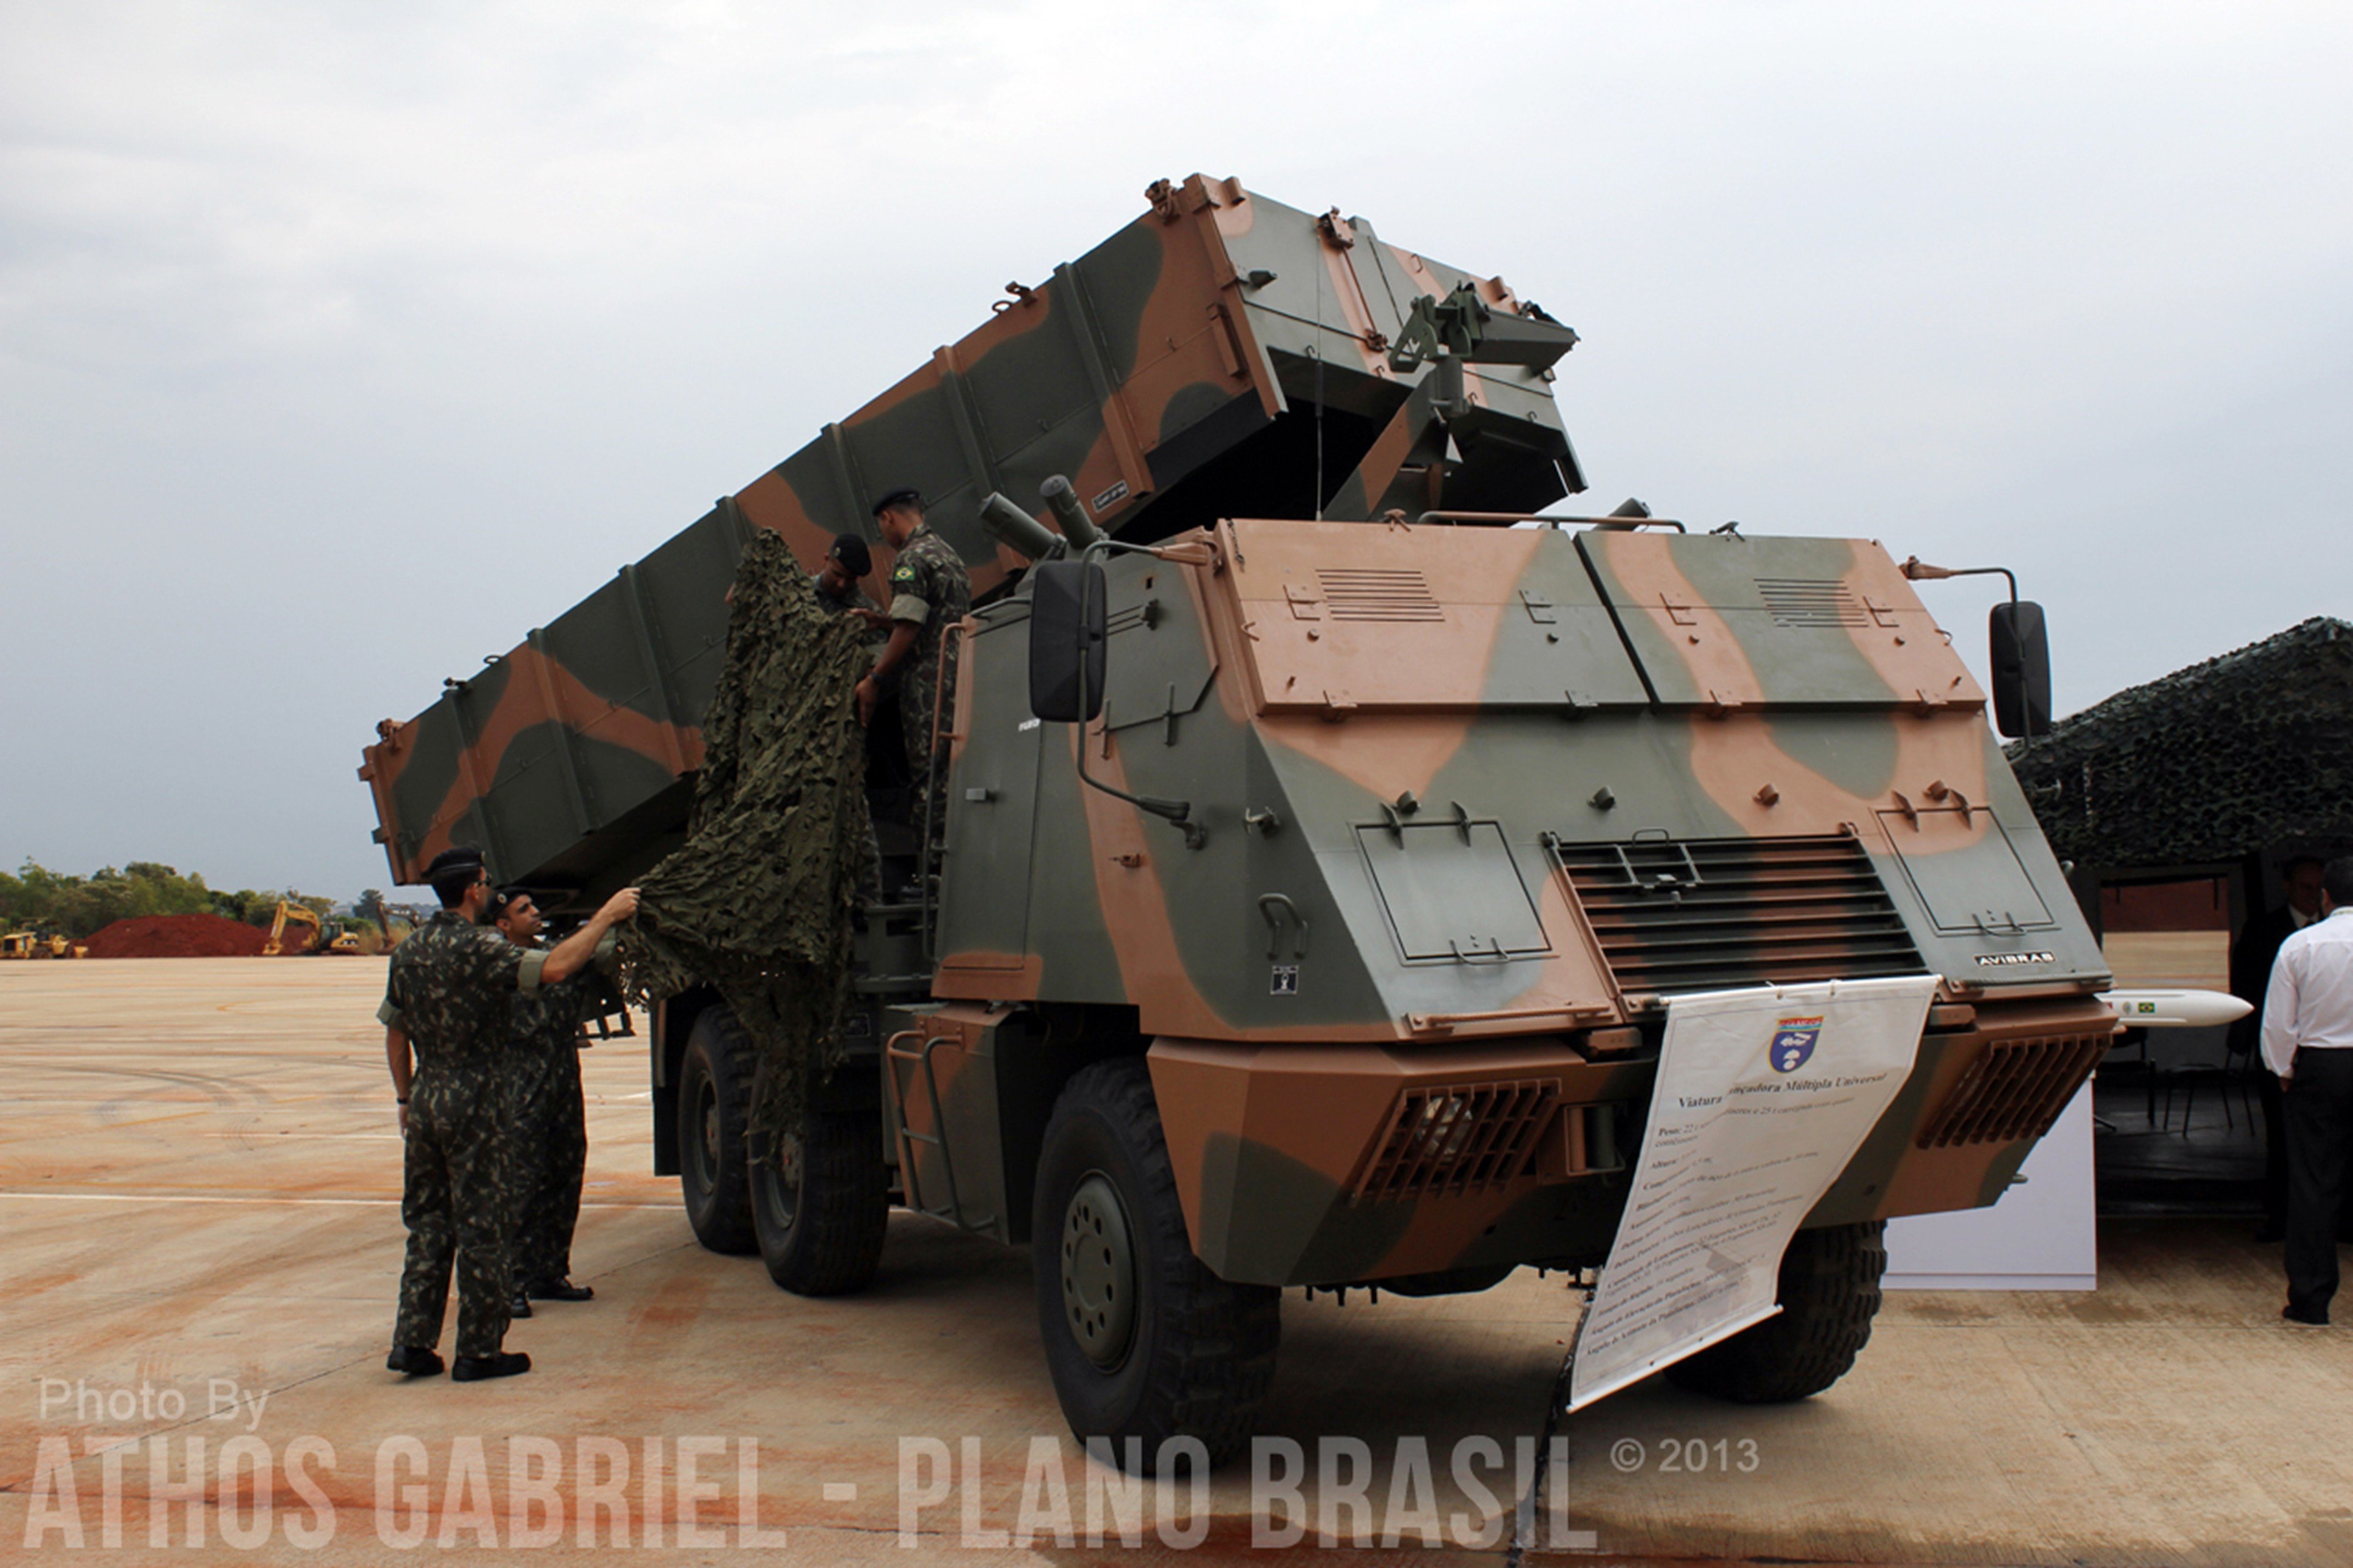 astros ii, Vehicle, Military, Army, Combat, Armored, Missile, Attack, Brazil,  4 Wallpaper